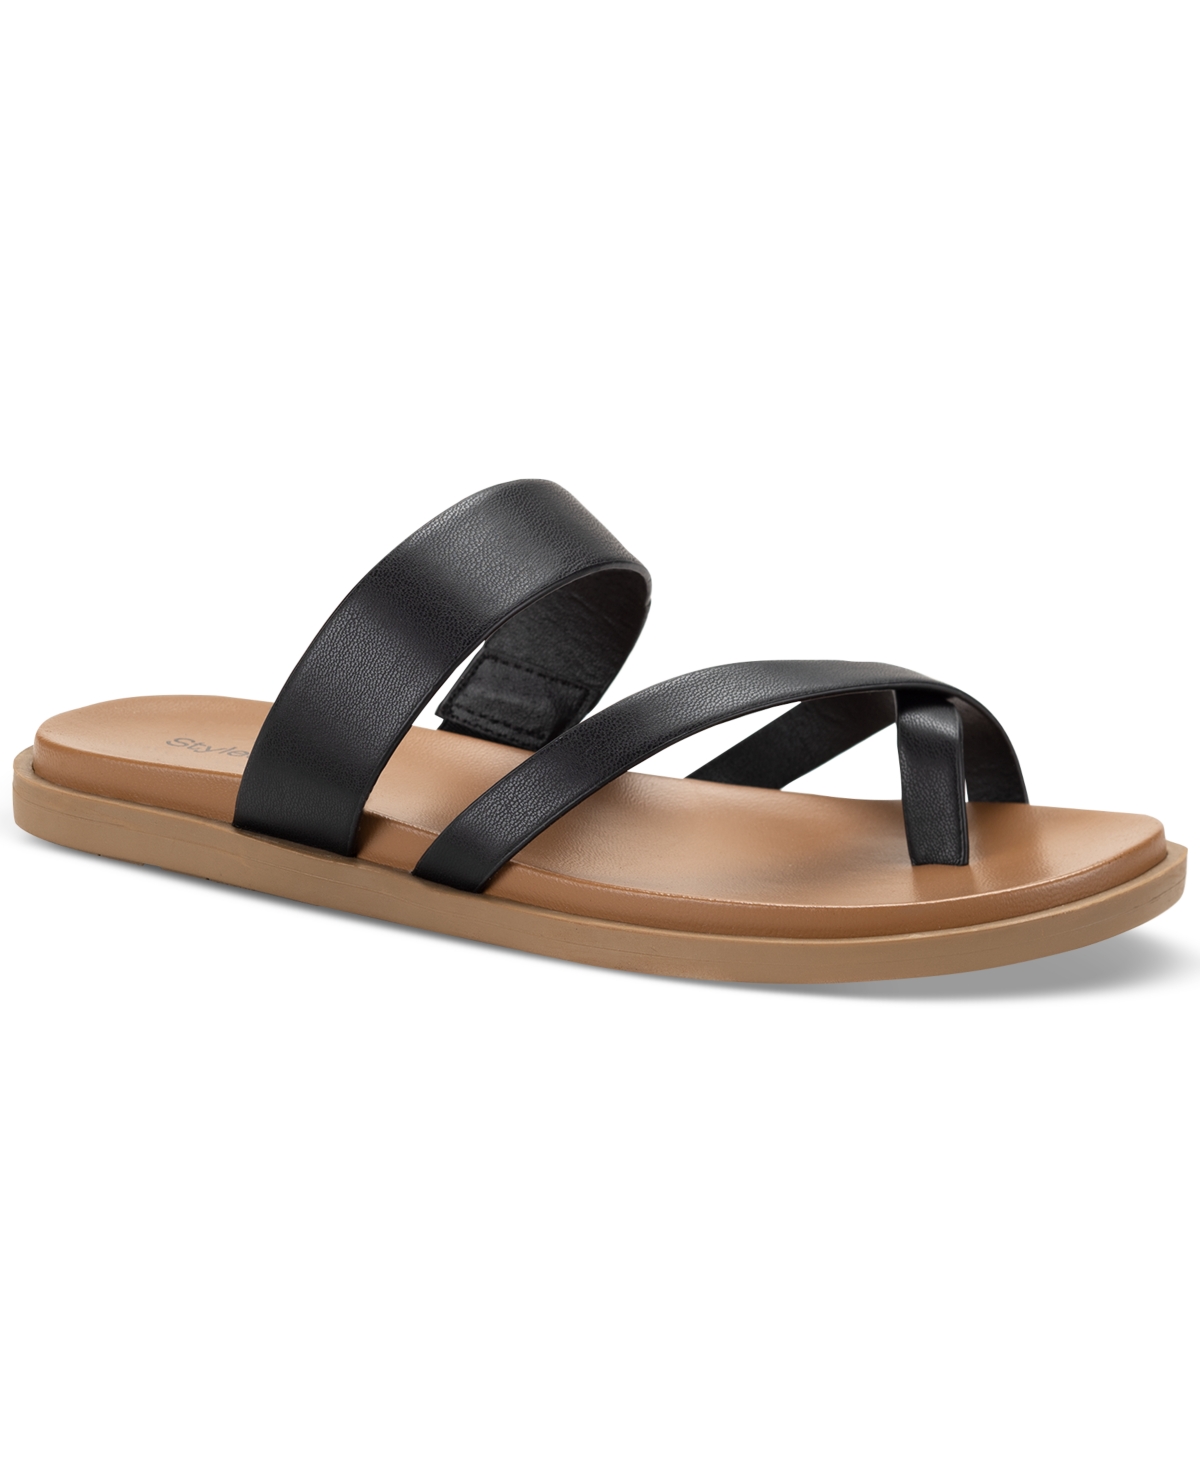 Cordeliaa Slip-On Strappy Flat Sandals, Created for Macy's - Cork